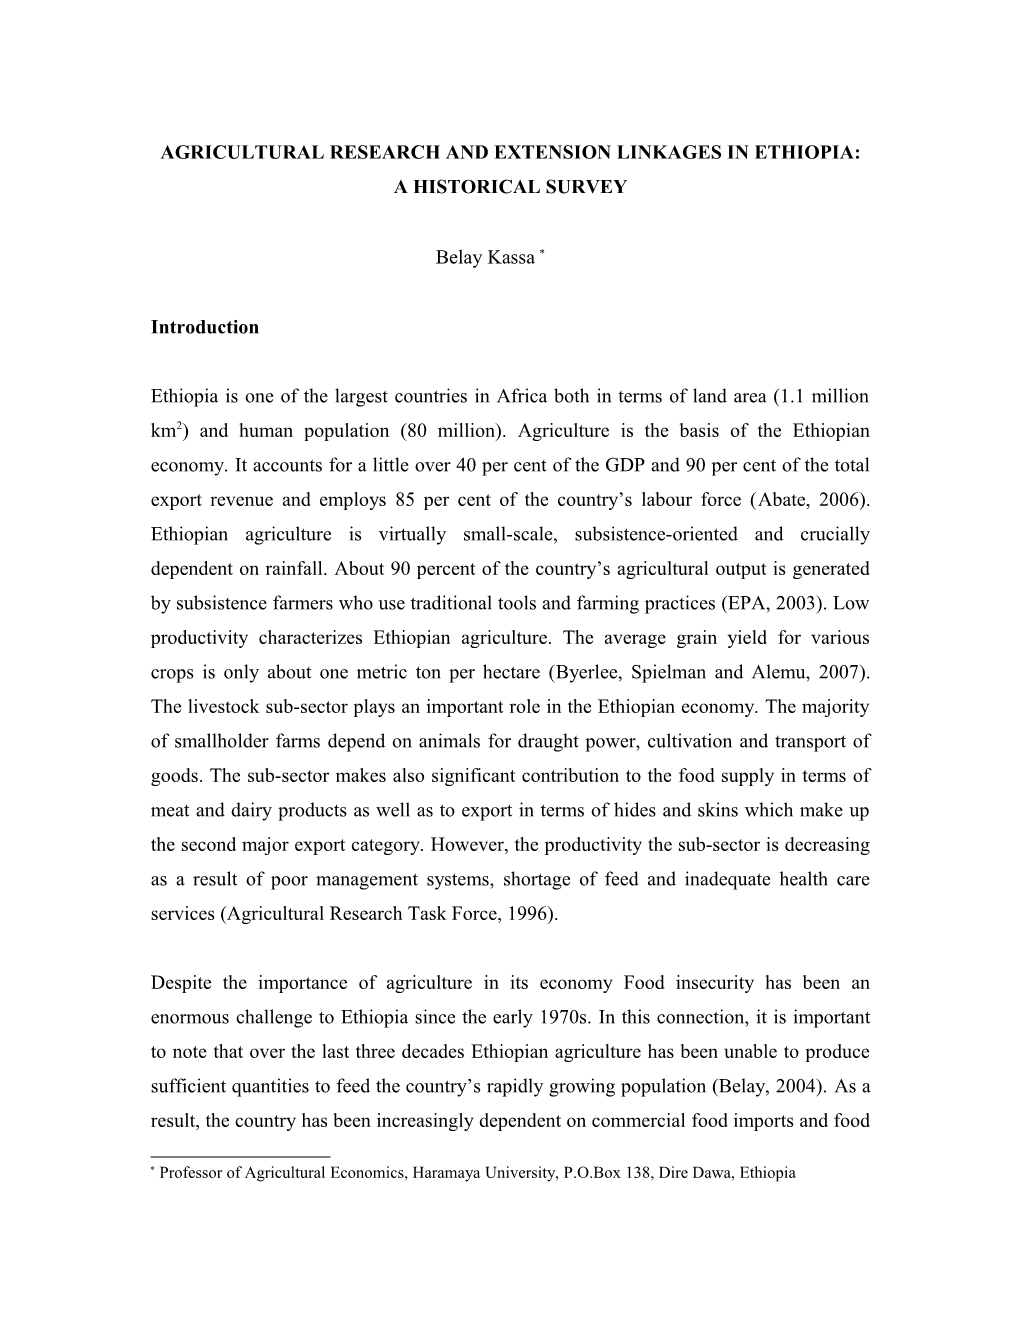 Agricultural Research and Extension Linkage in Ethiopia: a Historical Survey